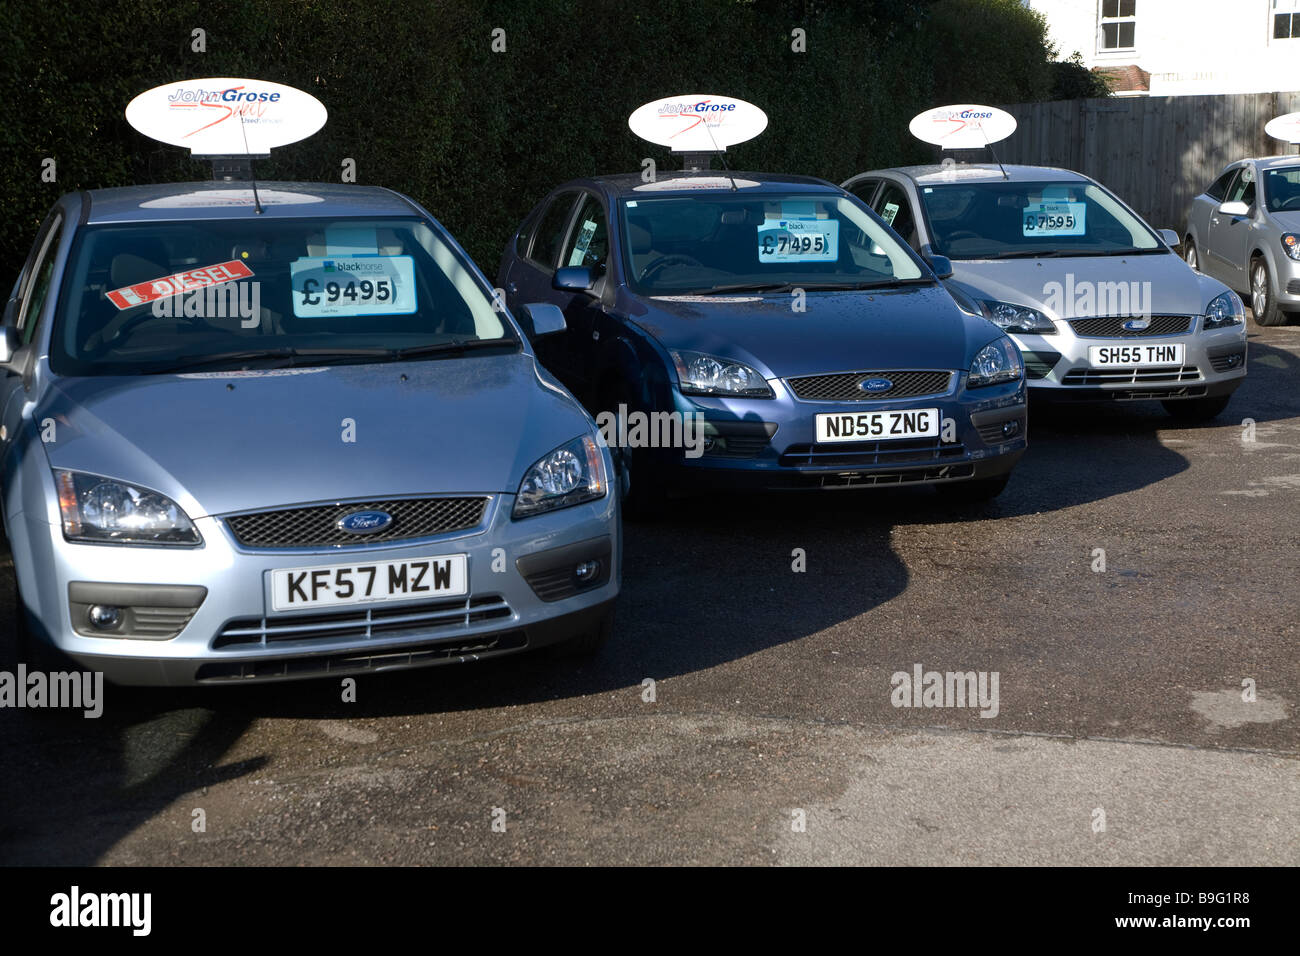 Second hand used cars for sale on garage forecourt Stock ...